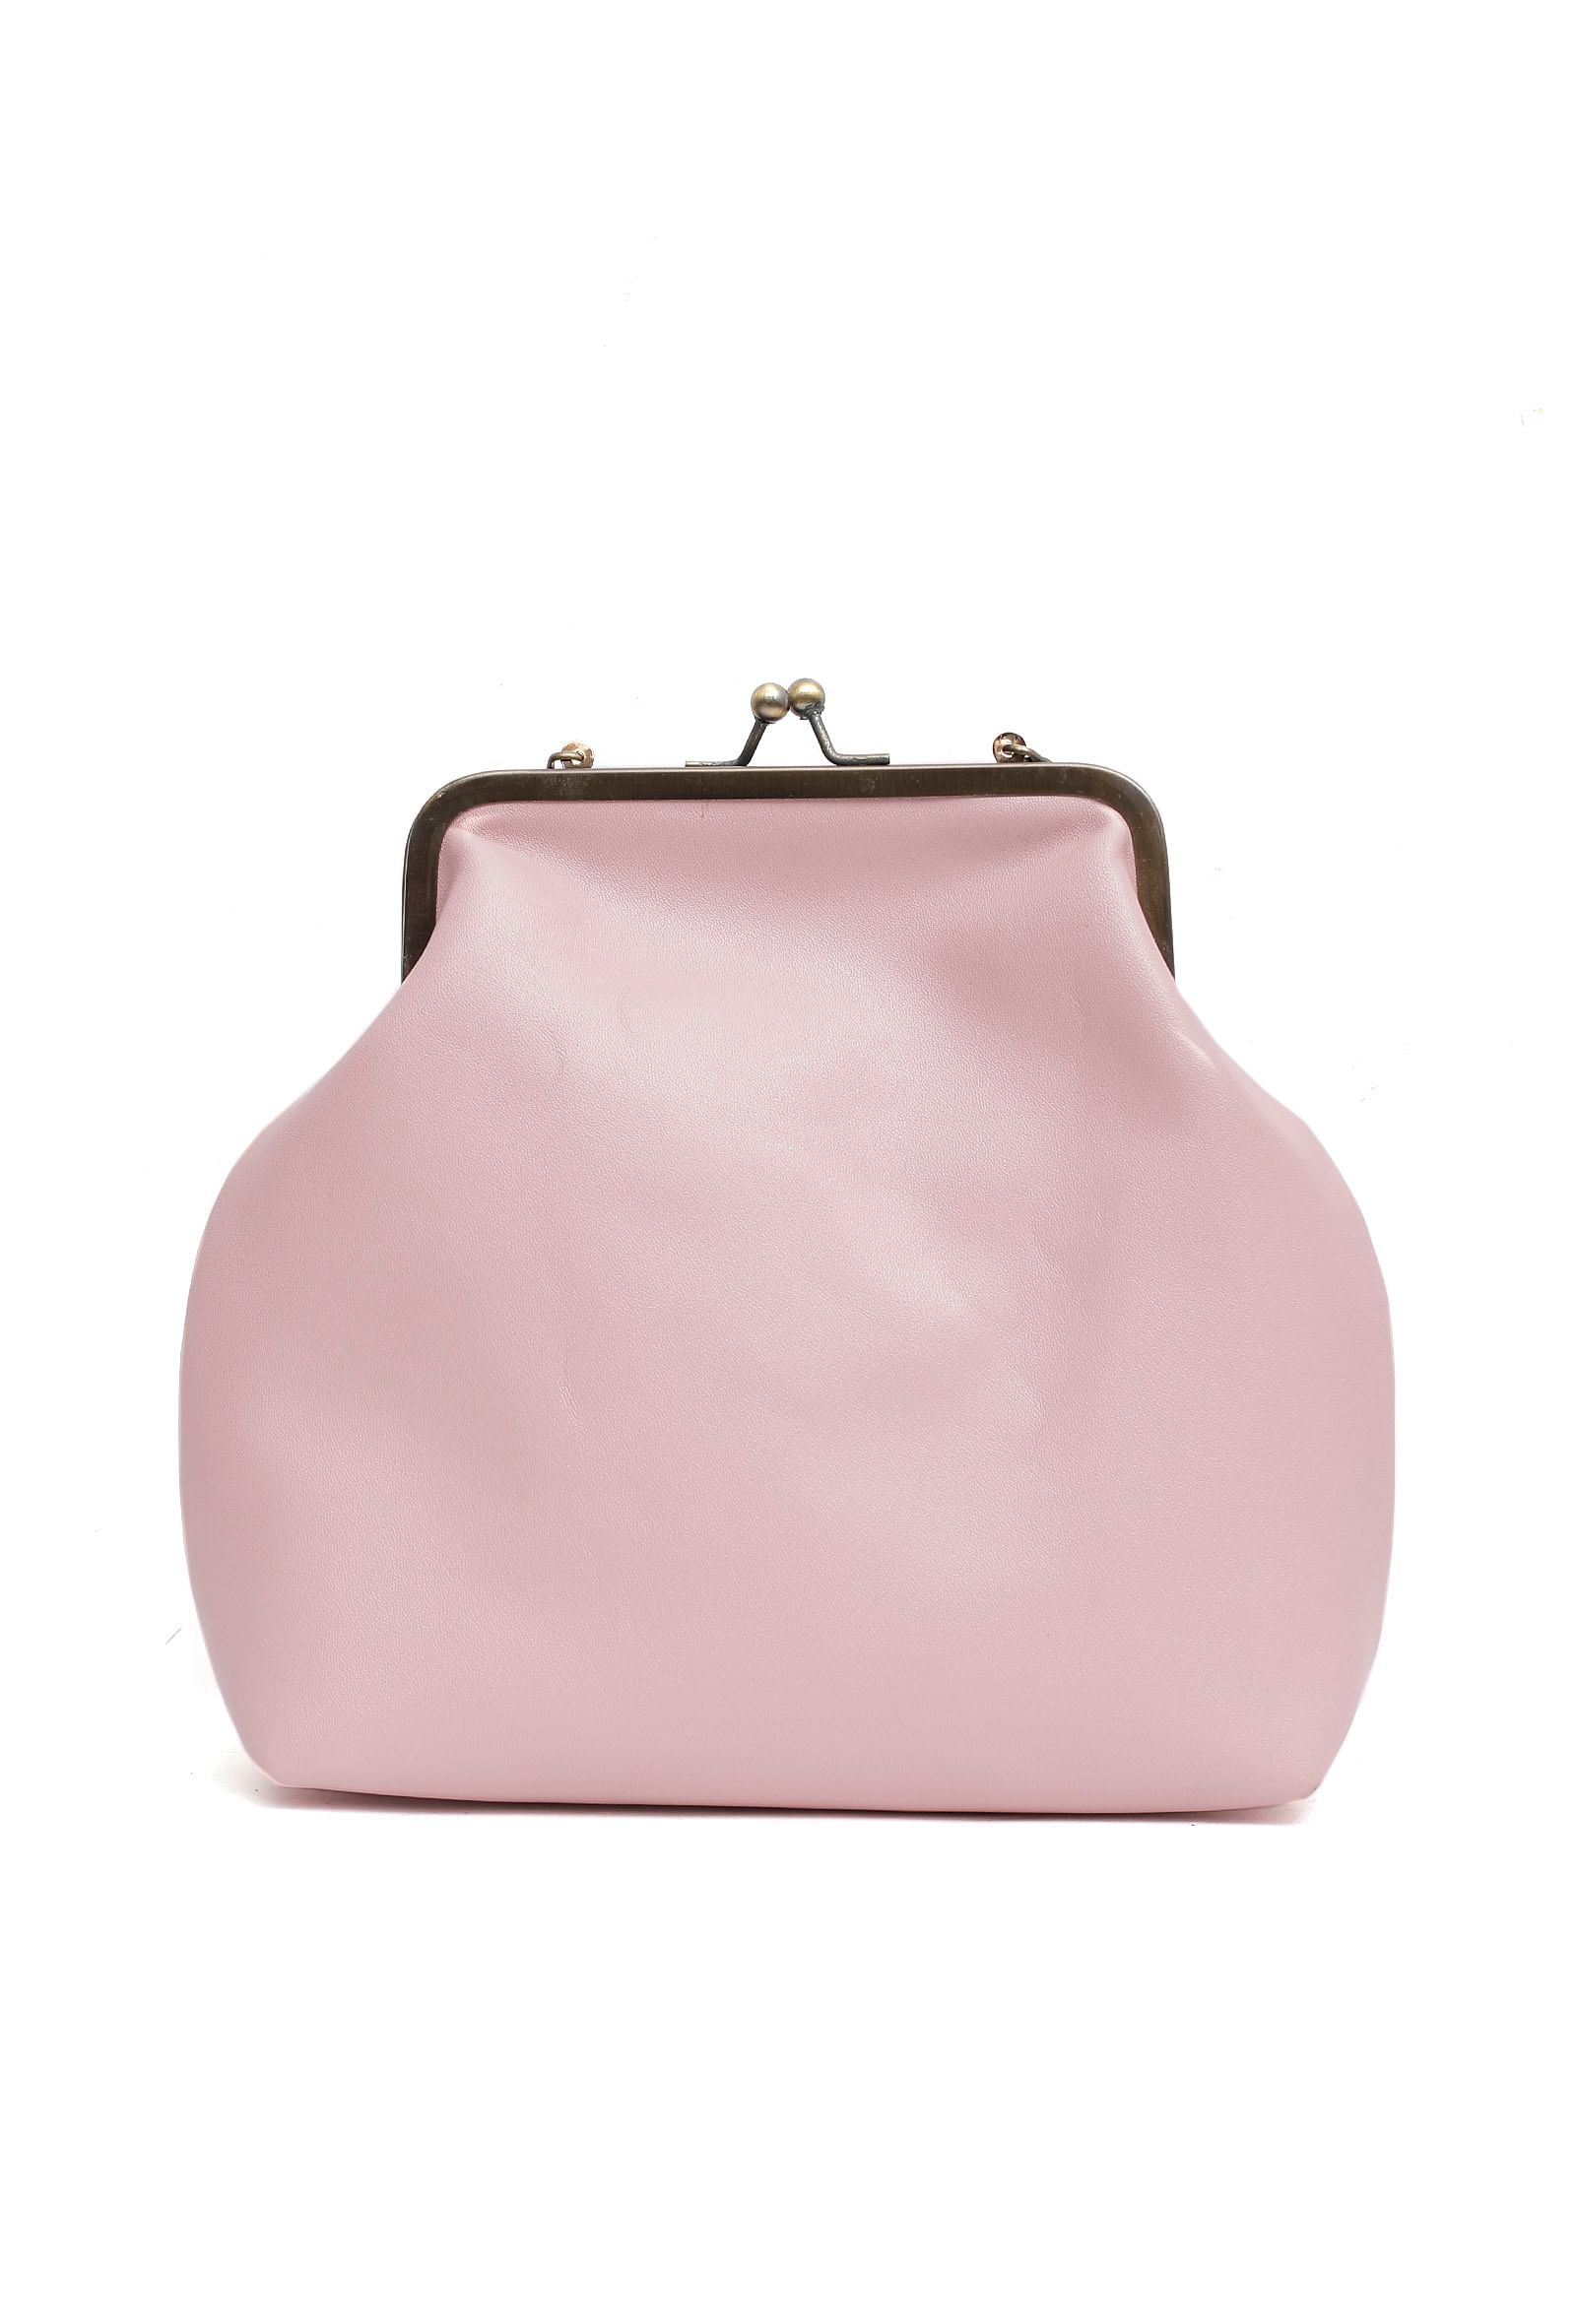 ROSY Casual Pink Clutch RB454 - Price in India | Flipkart.com